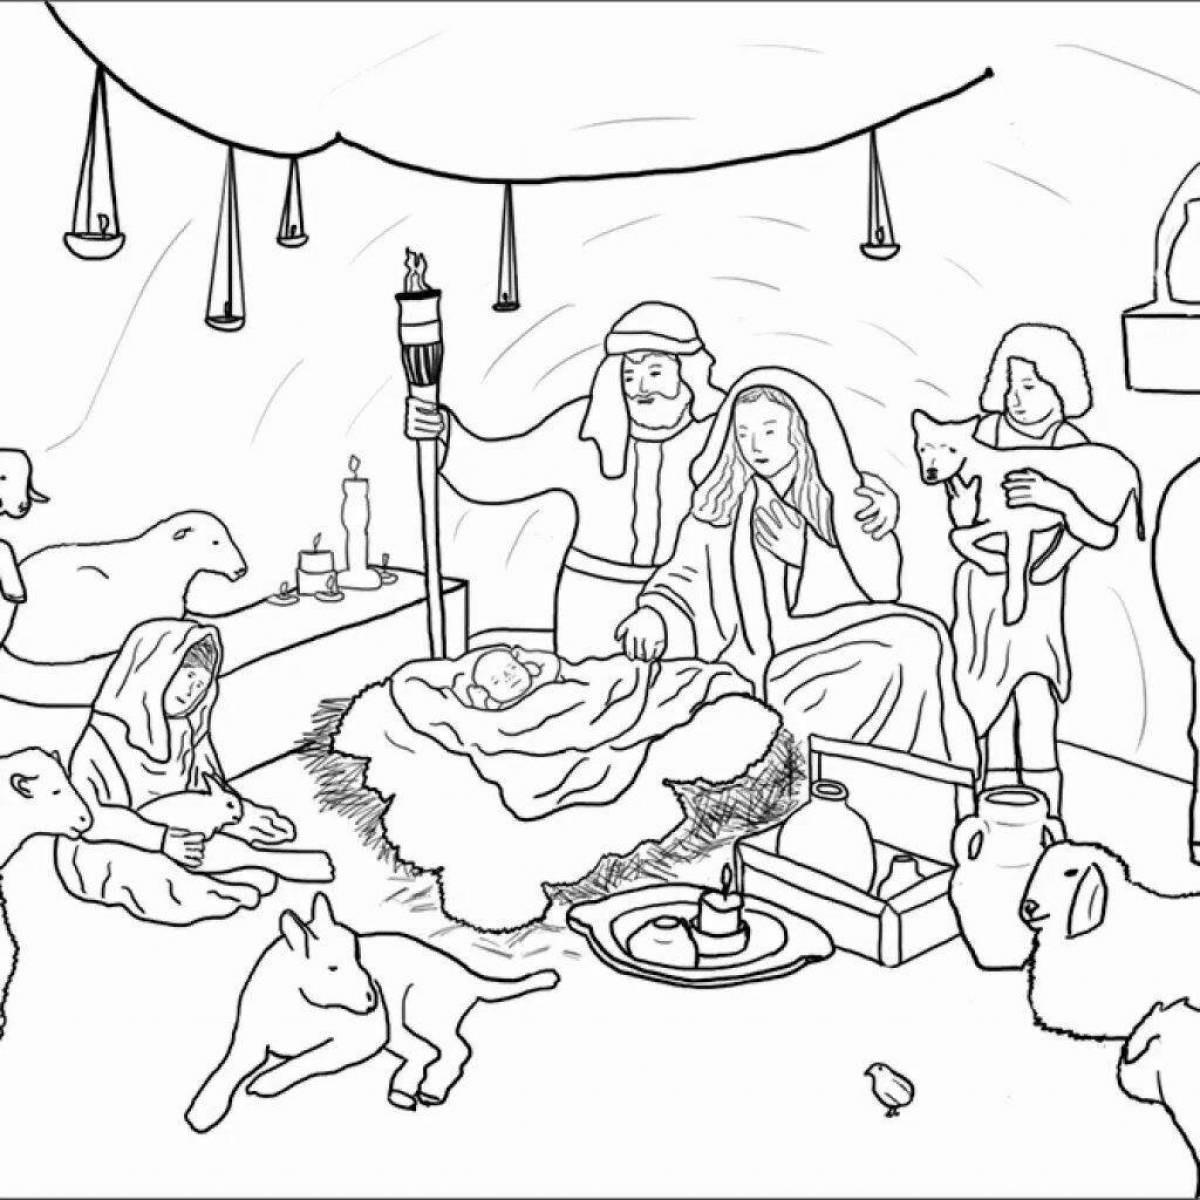 Wonderful Christmas story coloring book